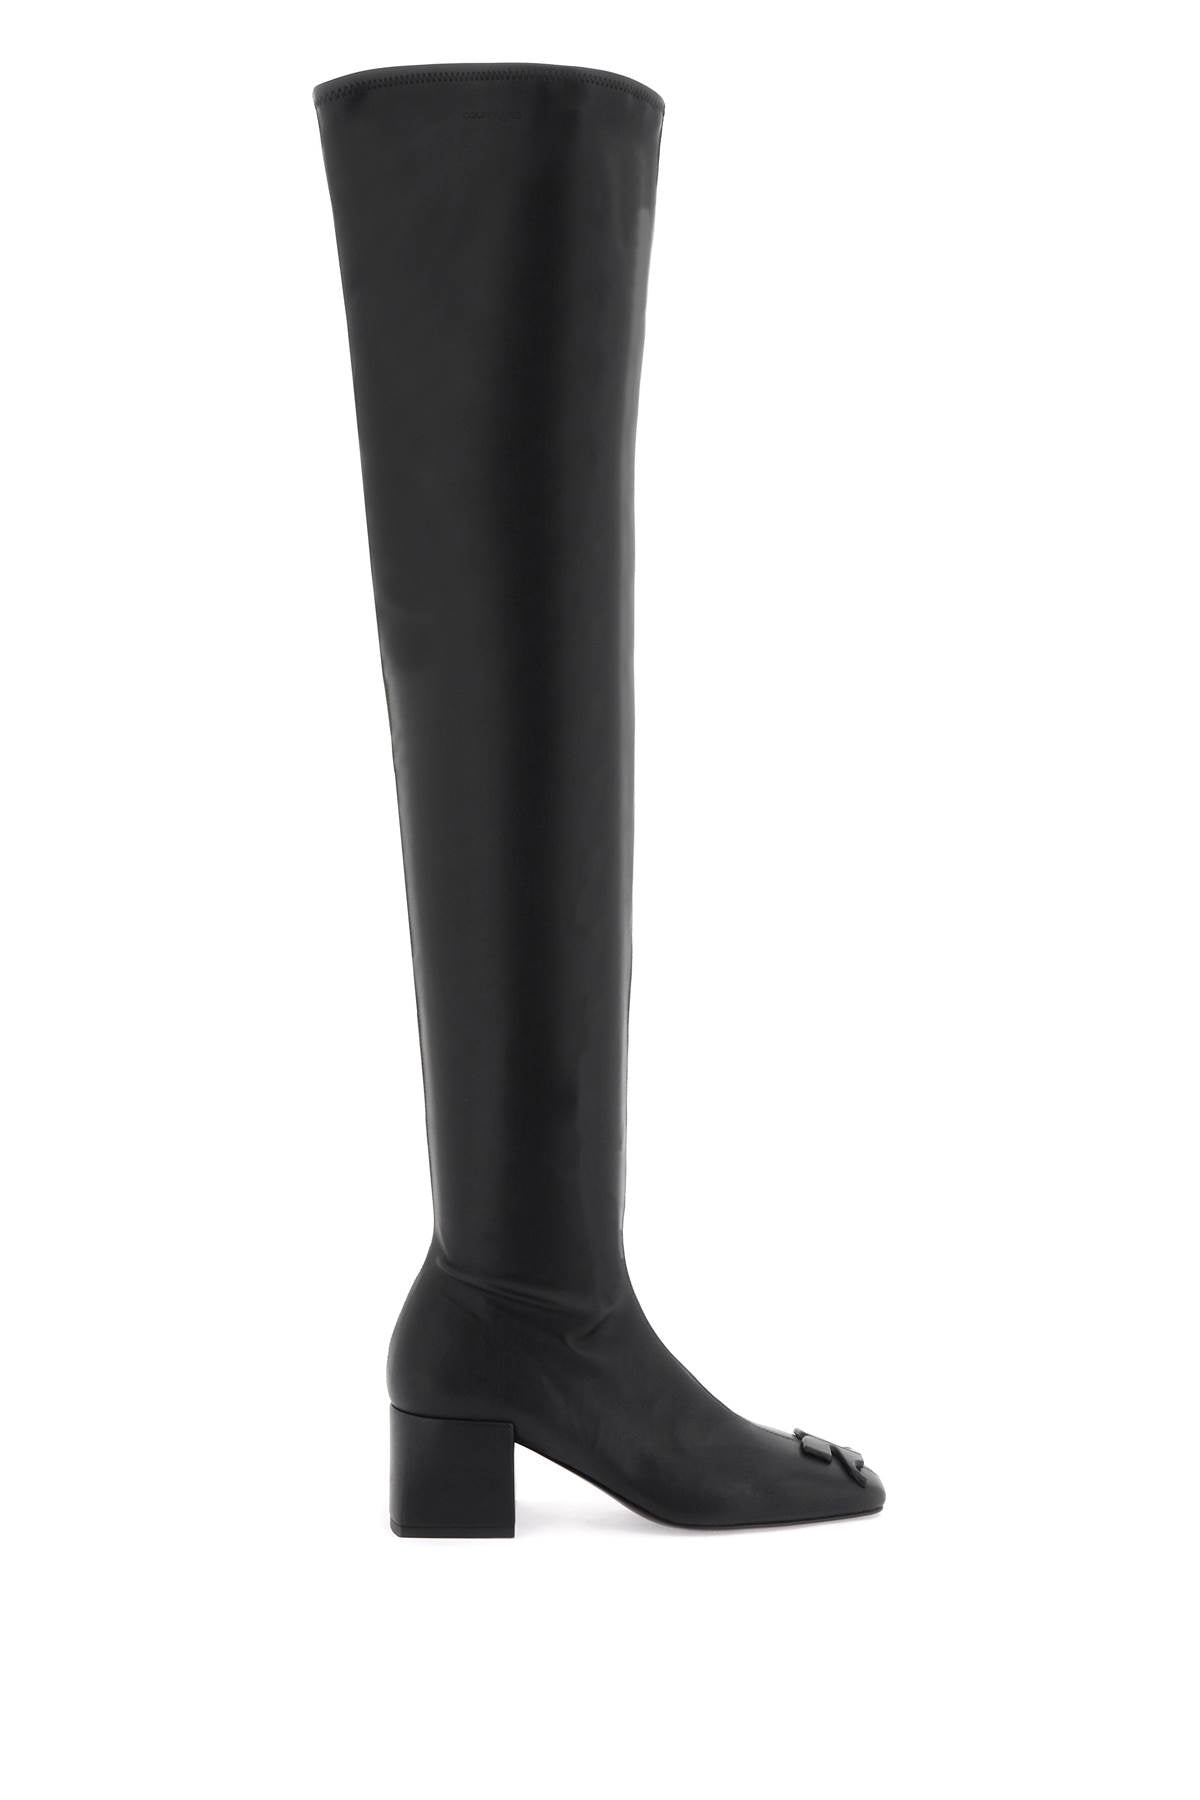 COURREGÈS Faux Leather High Boots - Square Toe and Boxy Heel for Women - FW23